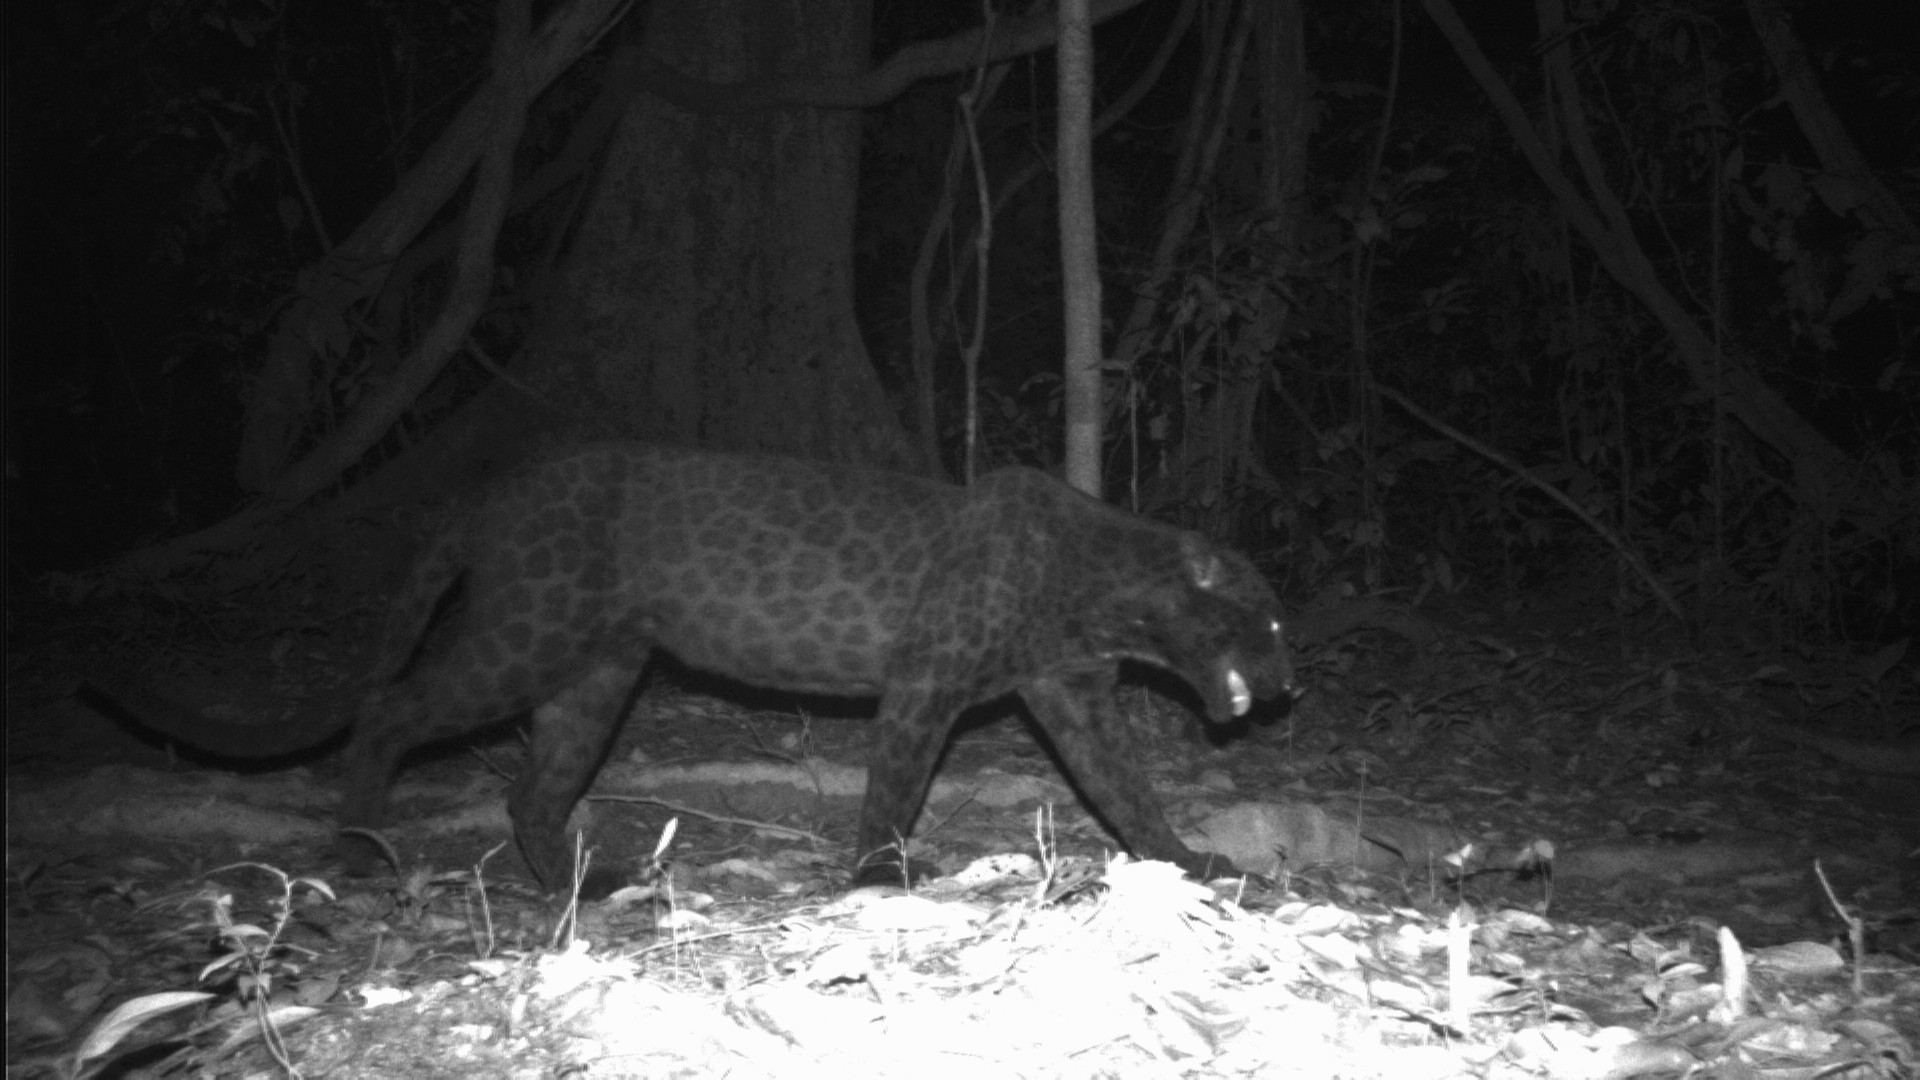 Melanistic leopard walking in the dark. You can see its spots under its dark coloring.